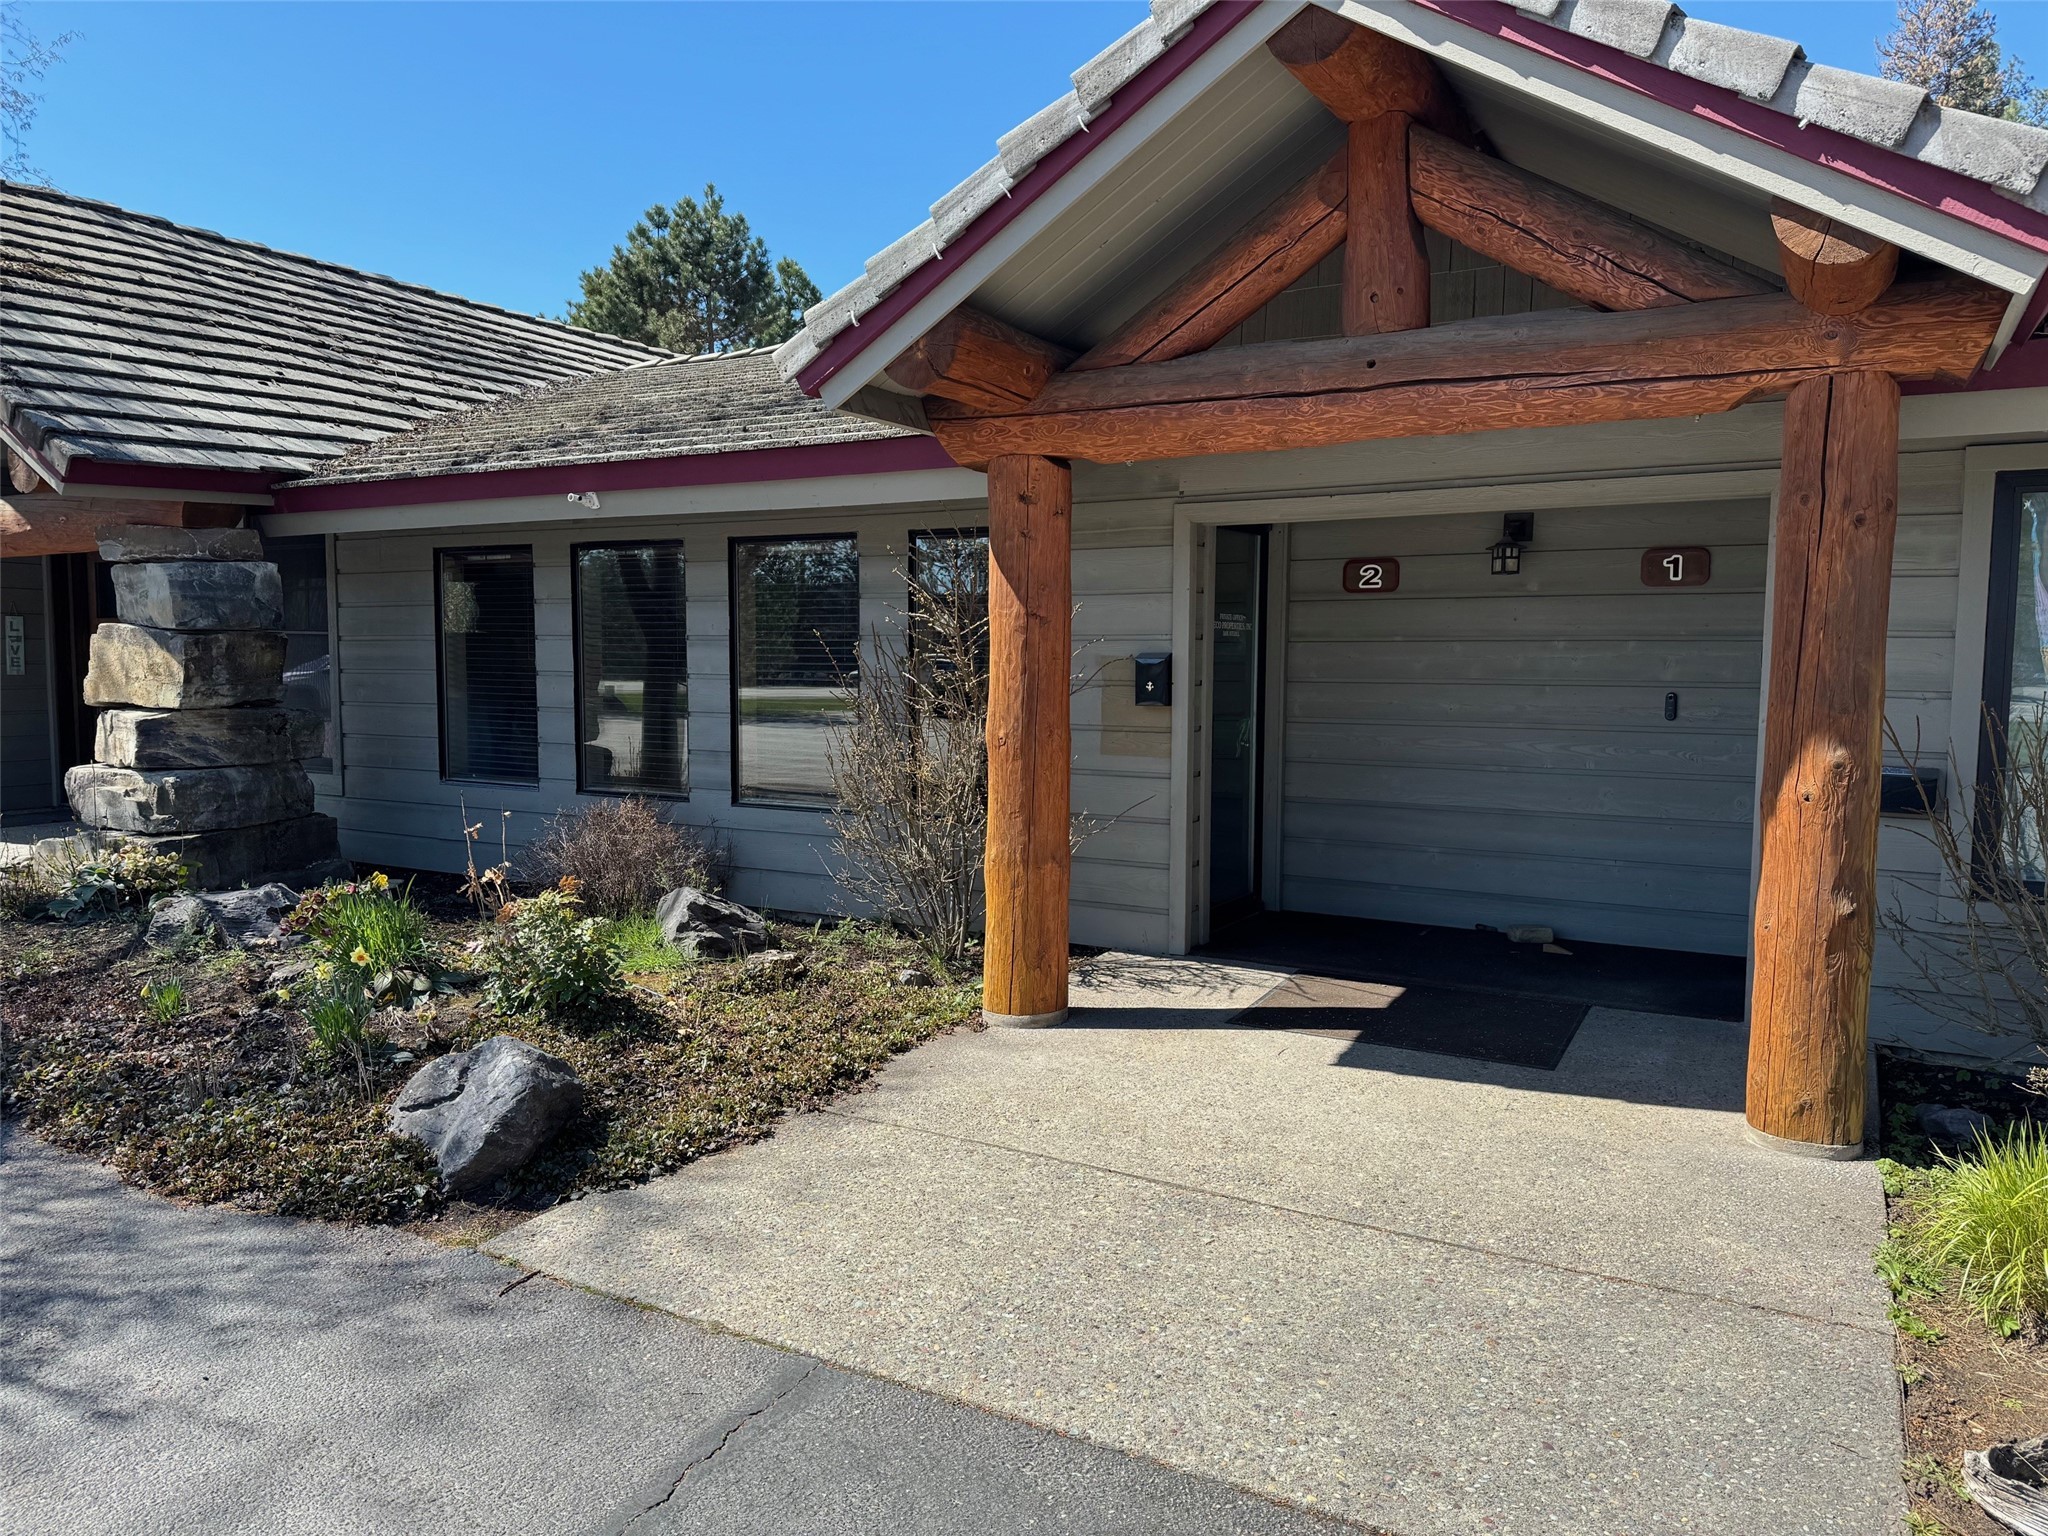 Excellent business location off Mt Hwy 35 with visible Hwy signage, available parking, and easy access to your own unit. The space has a large open area upon entry with one separate office with a viewing window into the main area. Office includes a half bath with storage shelves and a back door to access the rear yard and common area space. The built-in desks and cabinetry will stay.  B-2 Zoning allows for multiple uses.  To schedule a showing contact Rebecca at 406.890.1223, or your real estate professional.